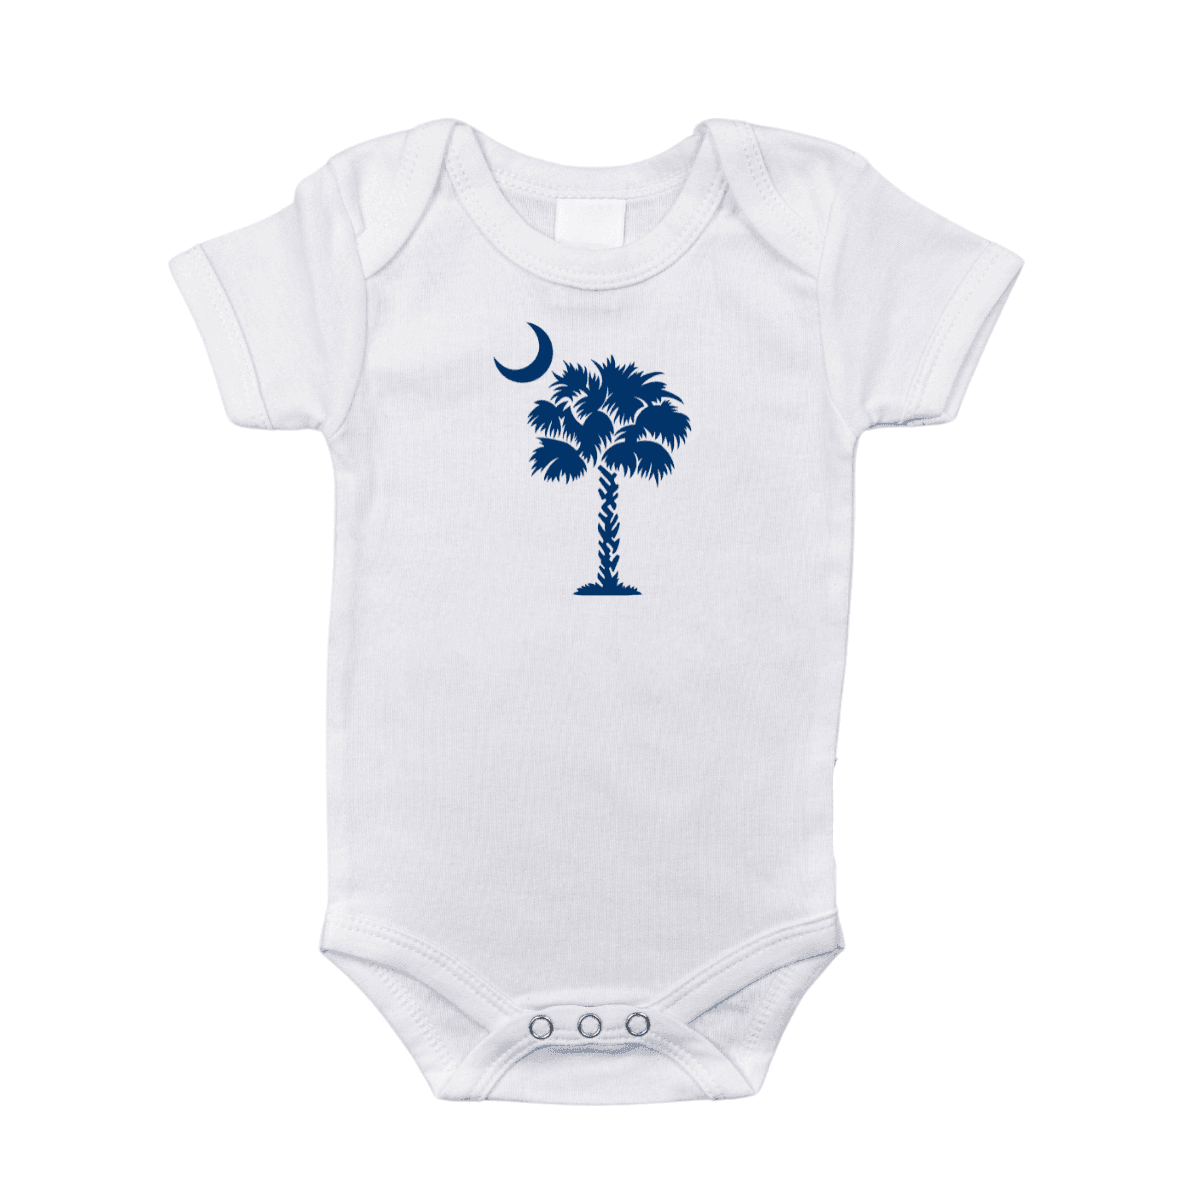 White baby onesie with a blue palmetto tree and crescent moon, text reads "South Carolina" in blue.